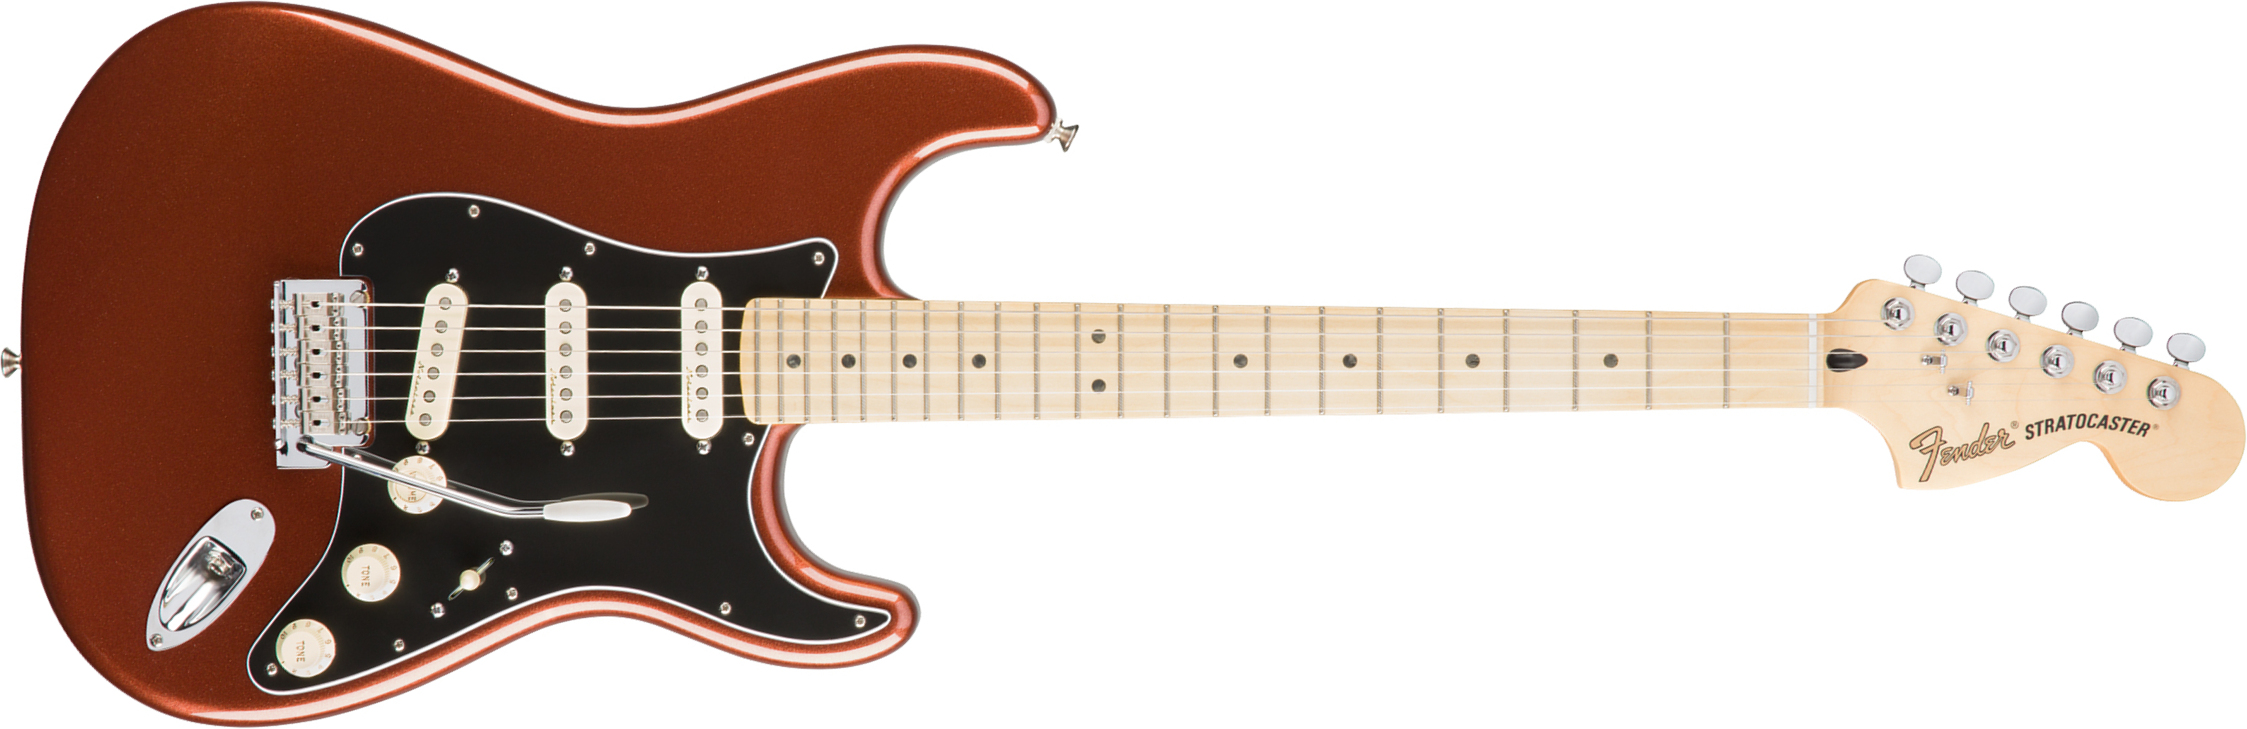 Fender Strat Deluxe Roadhouse Mex Mn - Classic Copper - Str shape electric guitar - Main picture